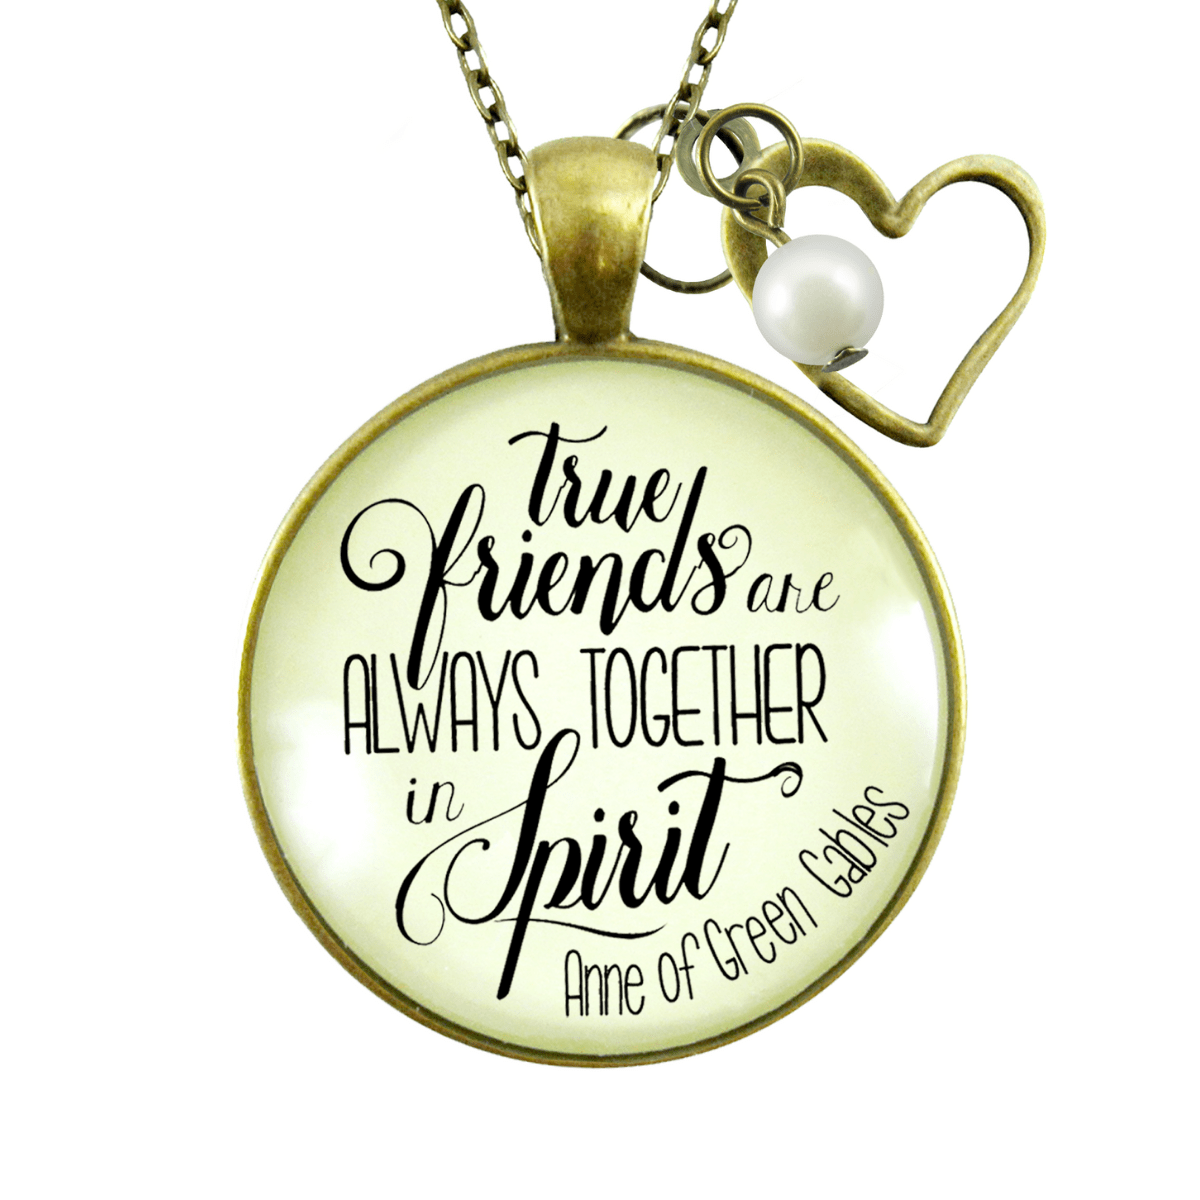 Gutsy Goodness True Friends are Always Together Necklace Literary Quote Gift Heart Jewelry - Gutsy Goodness;True Friends Are Always Together Necklace Literary Quote Gift Heart Jewelry - Gutsy Goodness Handmade Jewelry Gifts